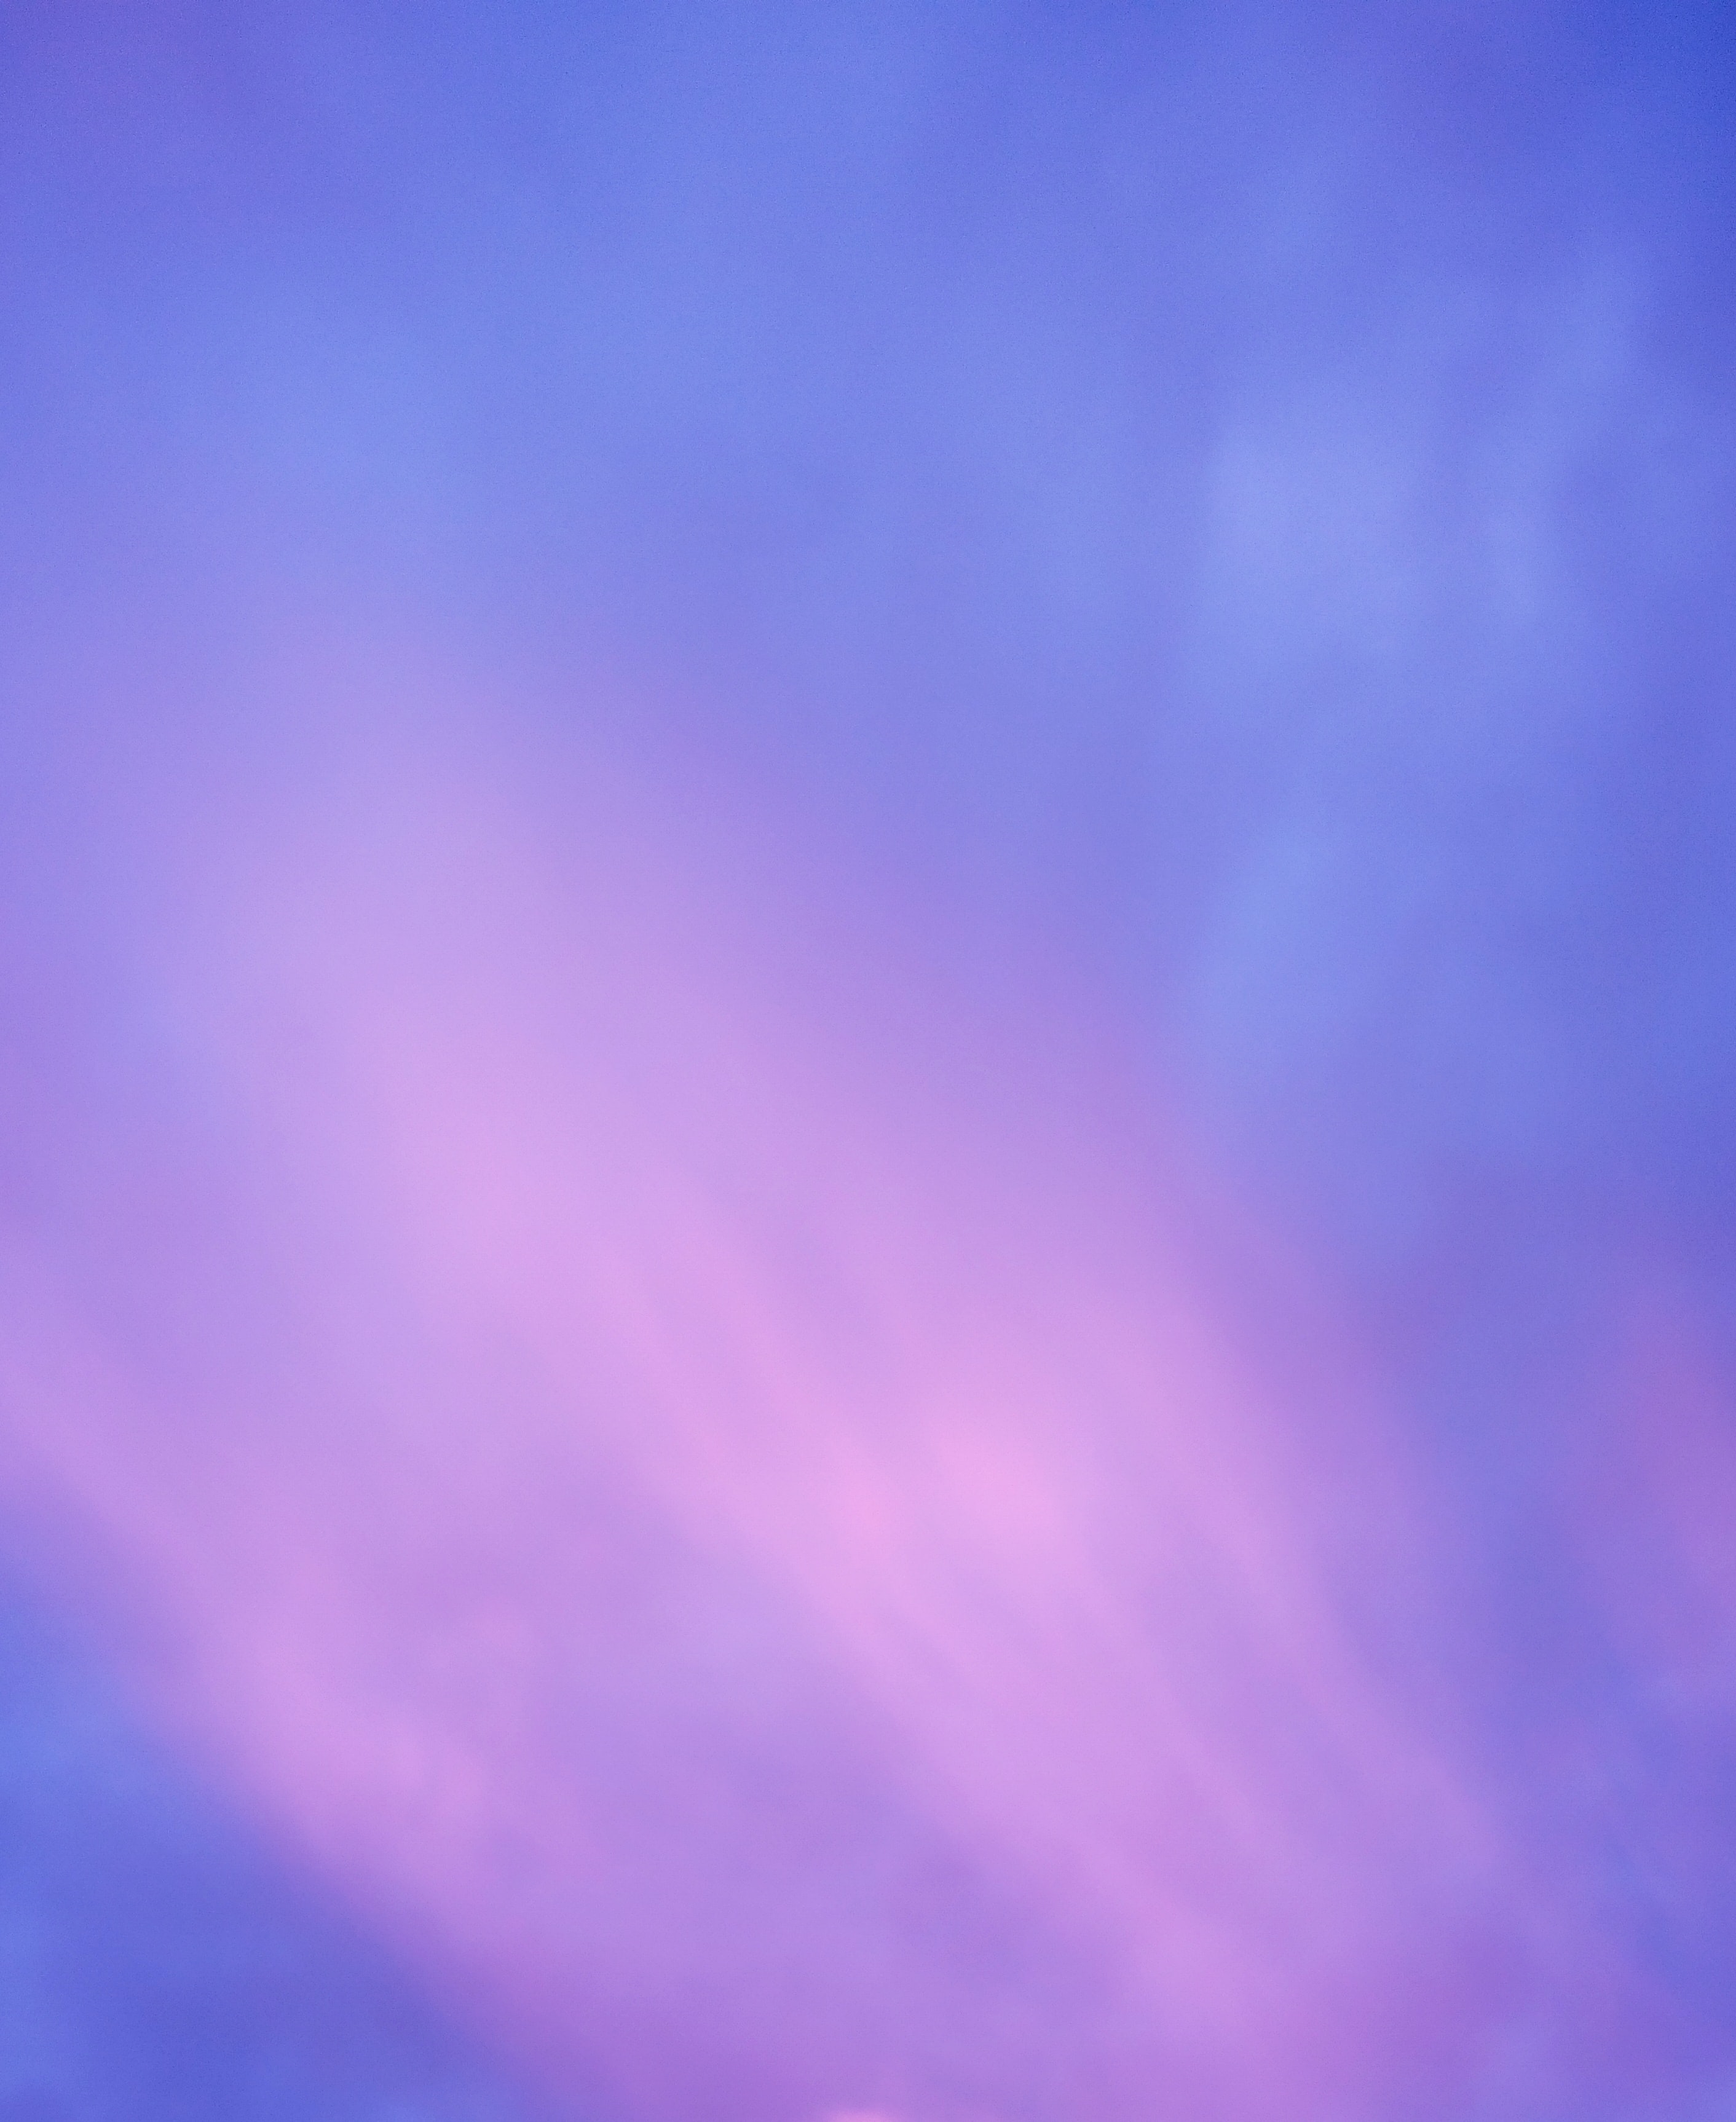 52306 free wallpaper 2160x3840 for phone, download images gradient, purple, smooth, violet 2160x3840 for mobile